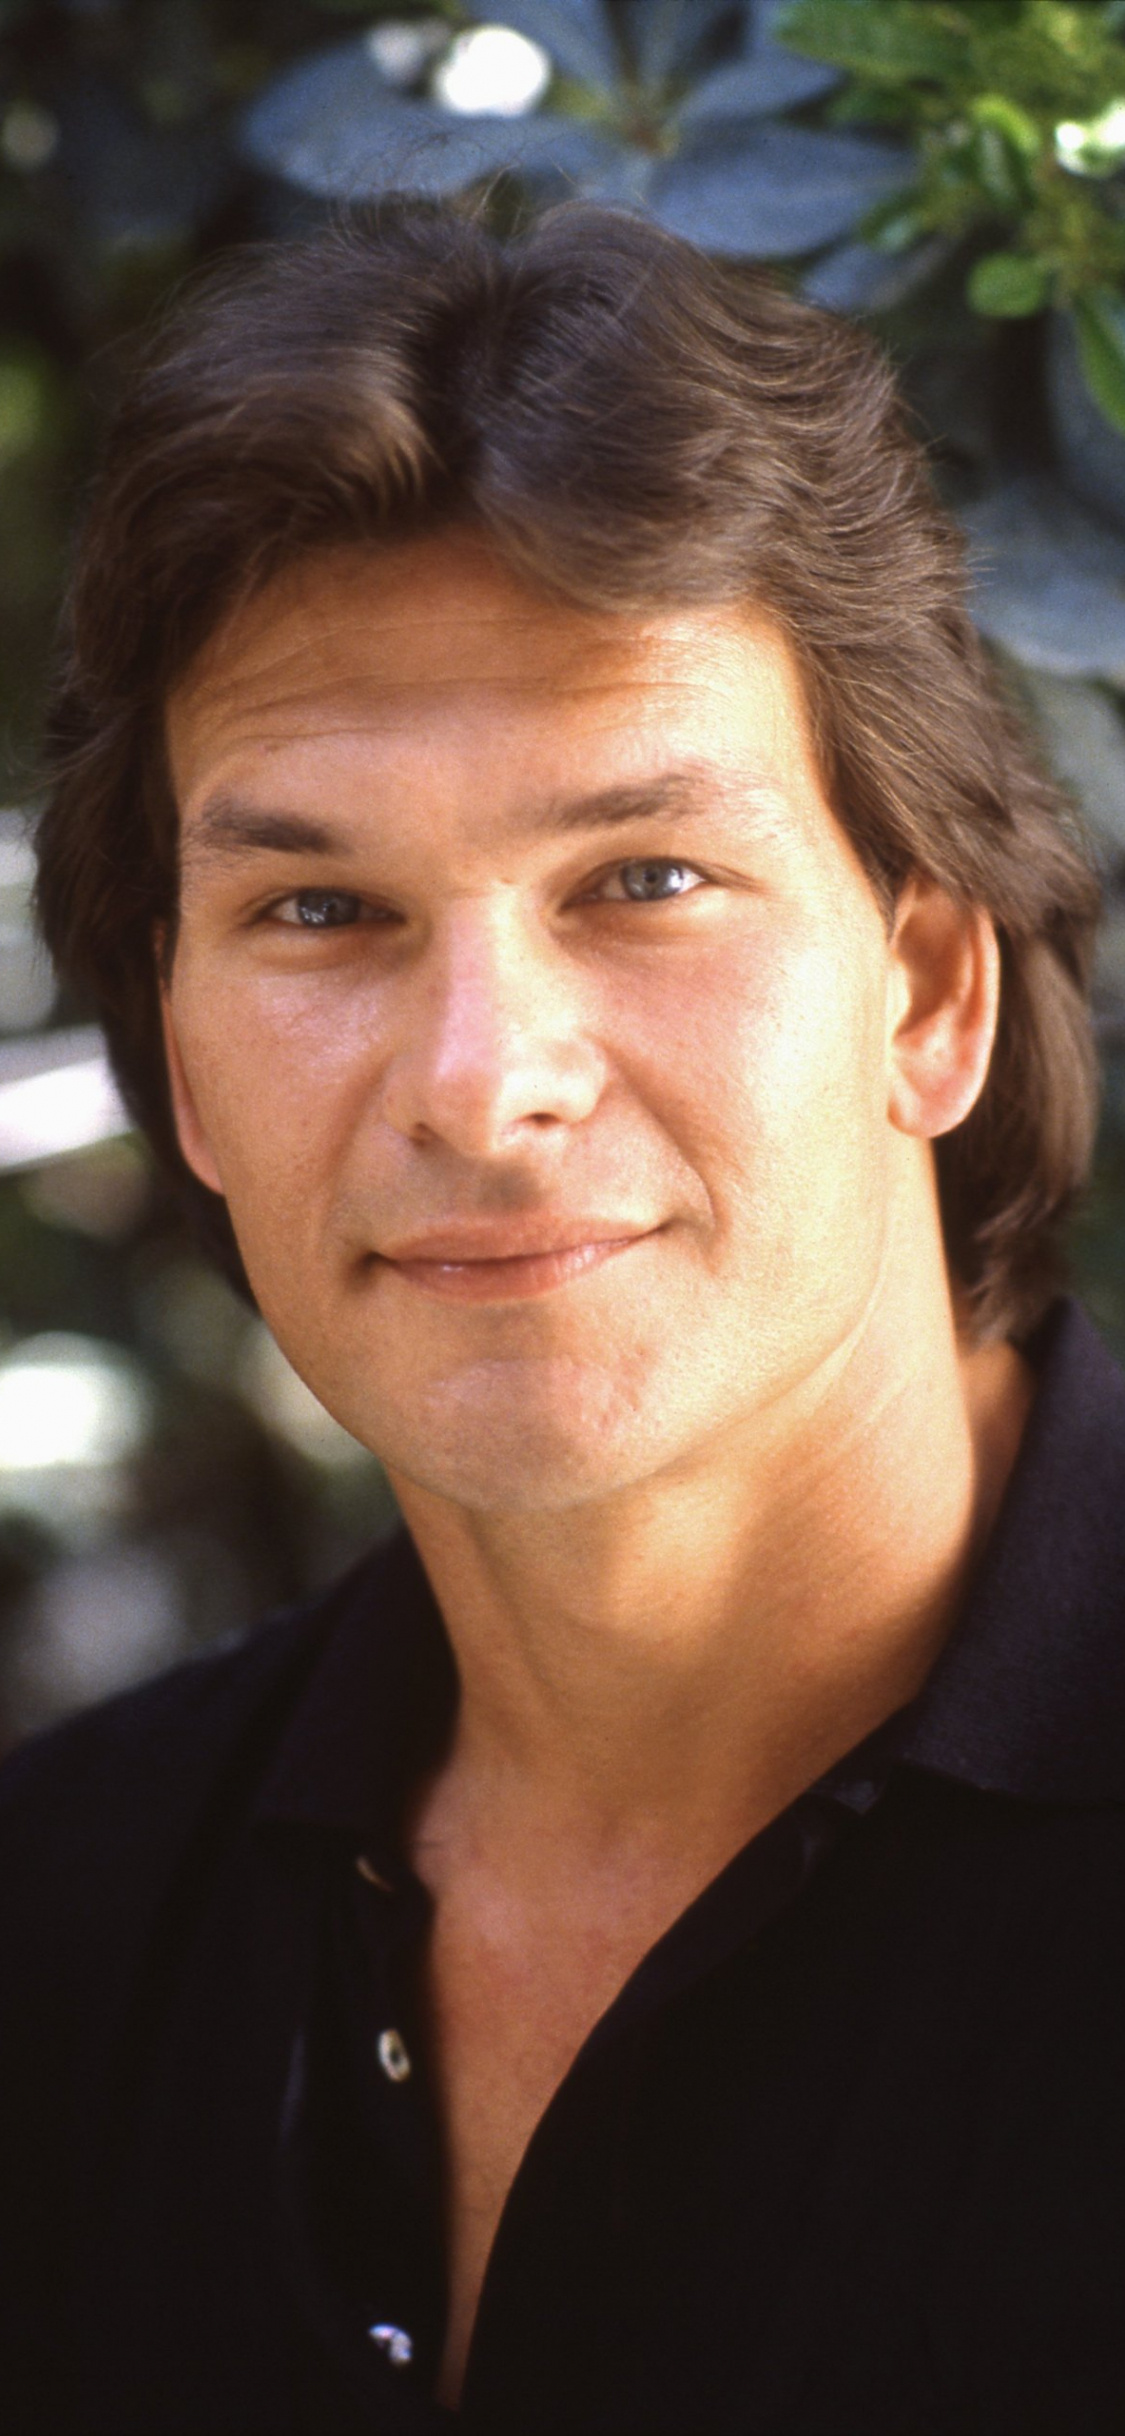 Patrick Swayze, Movie star, High quality wallpapers, Desktop and mobile, 1130x2440 HD Phone